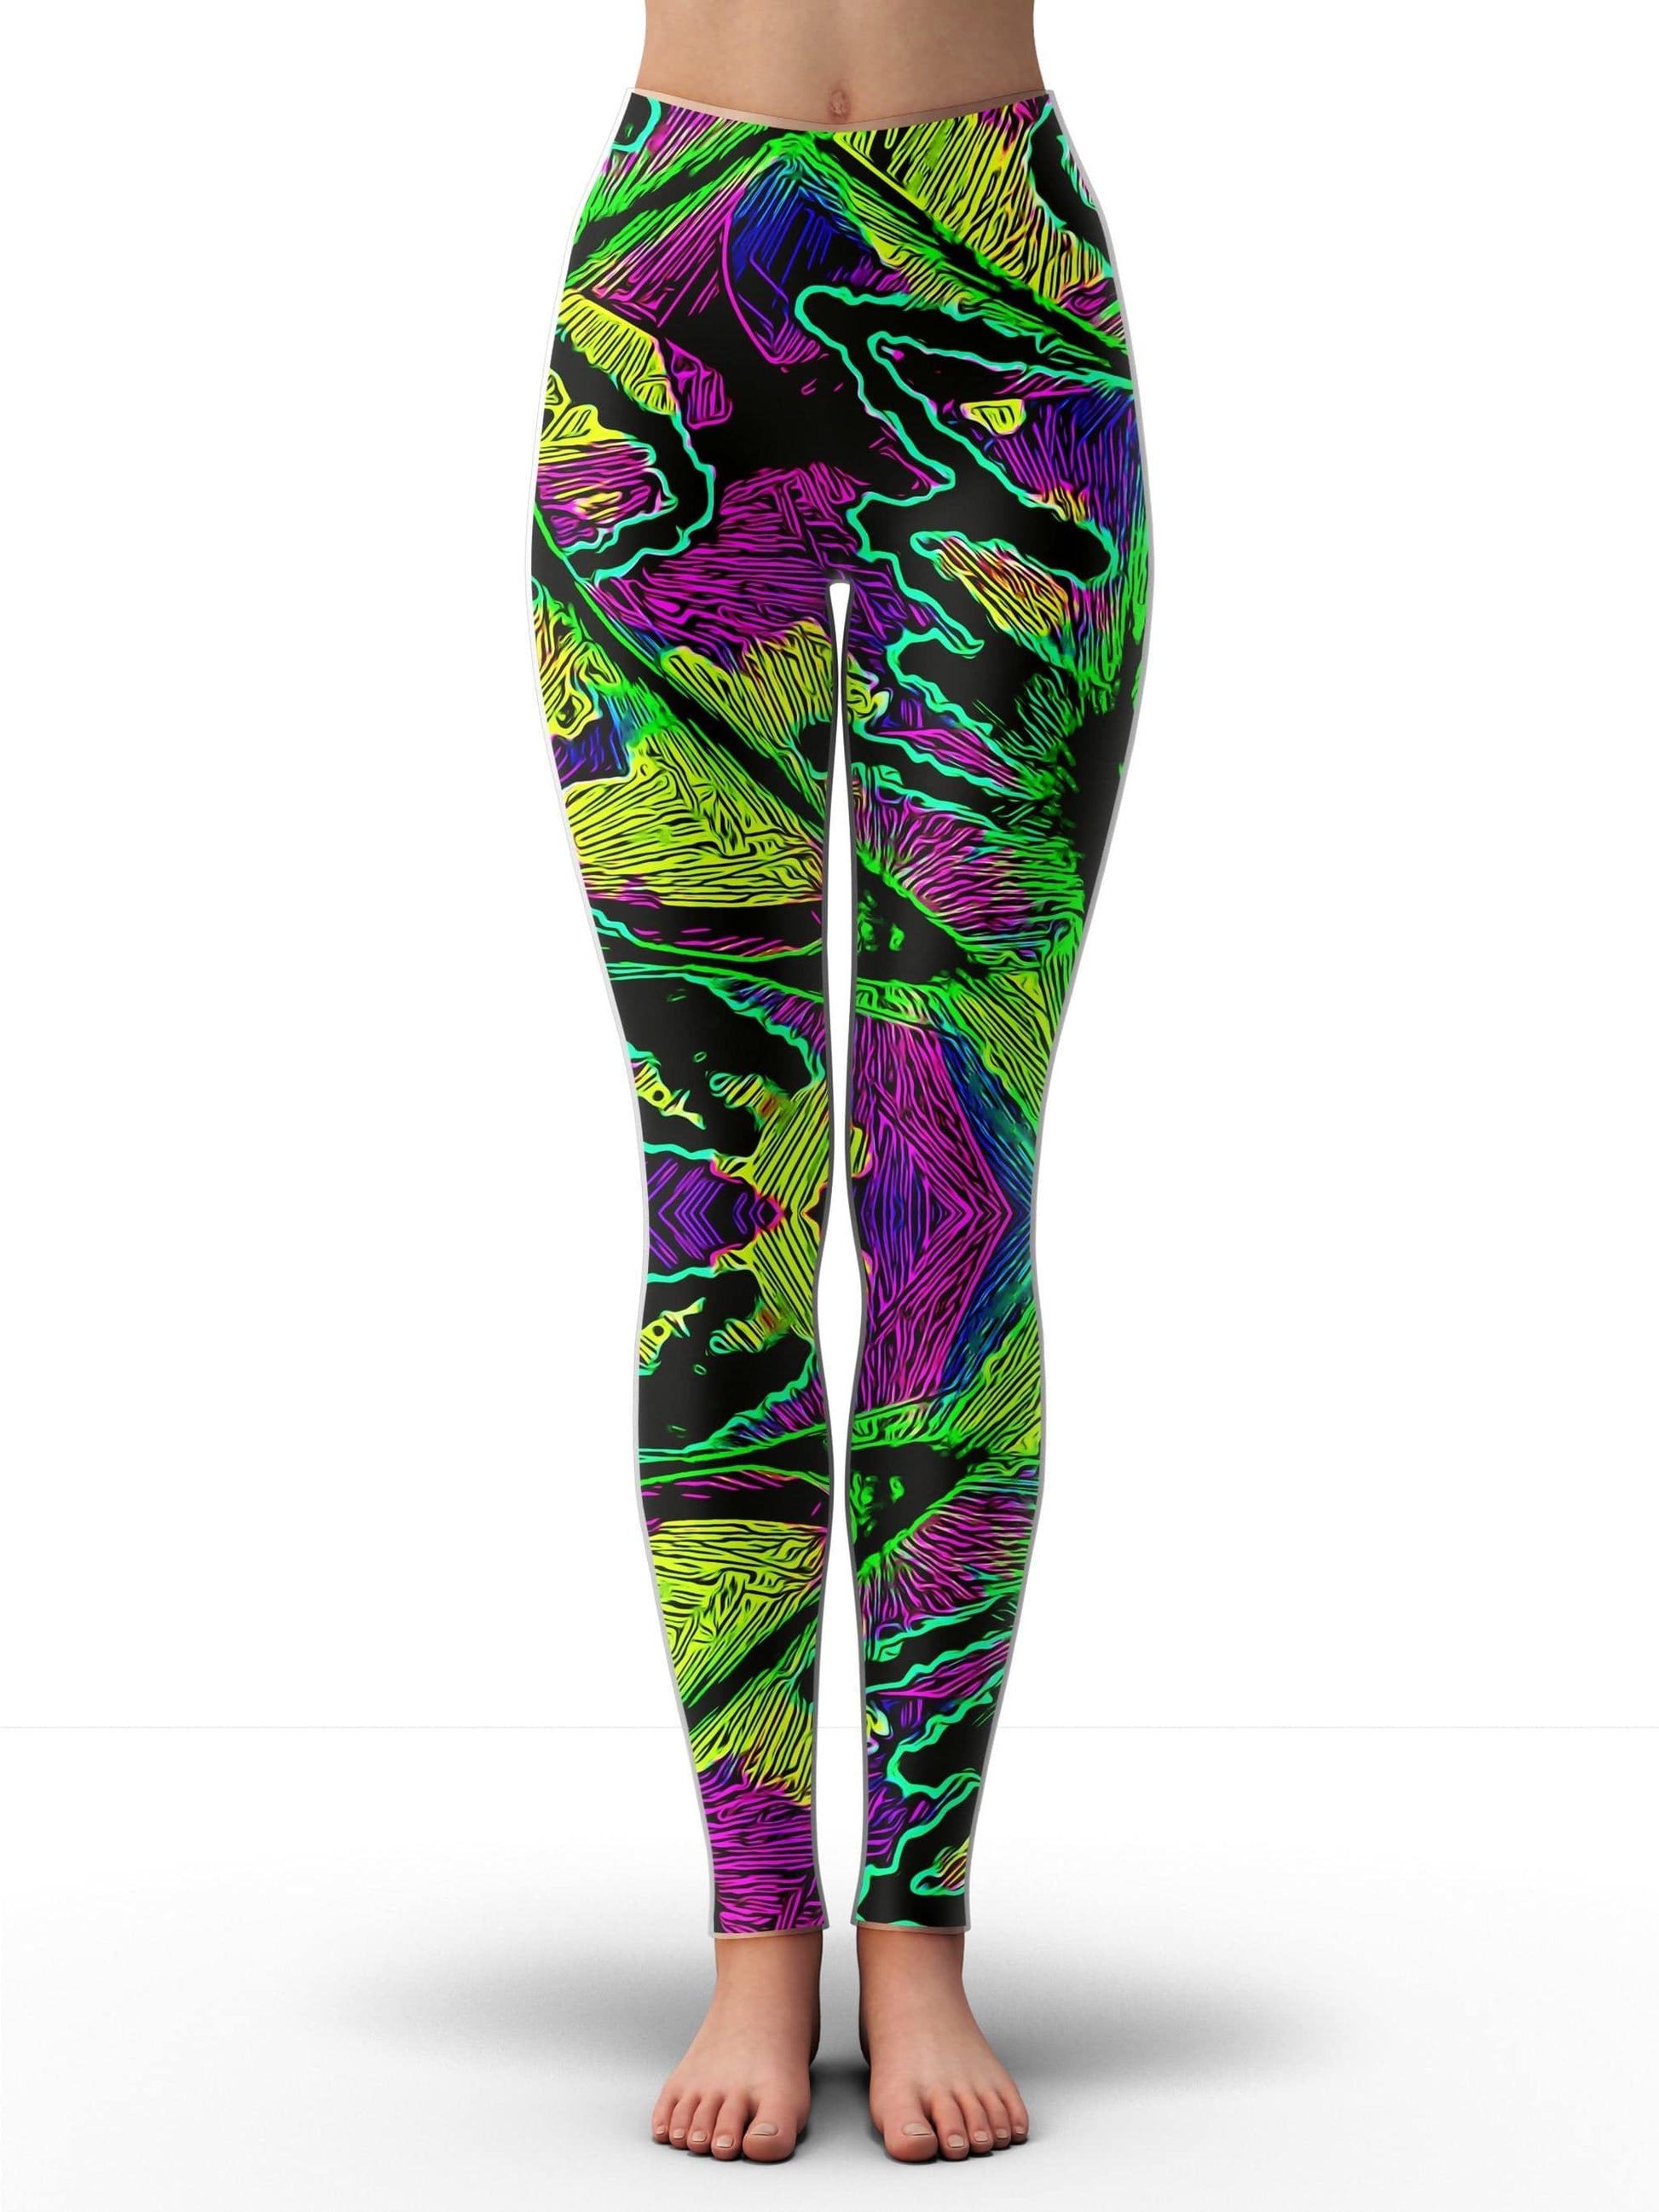 Neon Leggings, Shop The Largest Collection